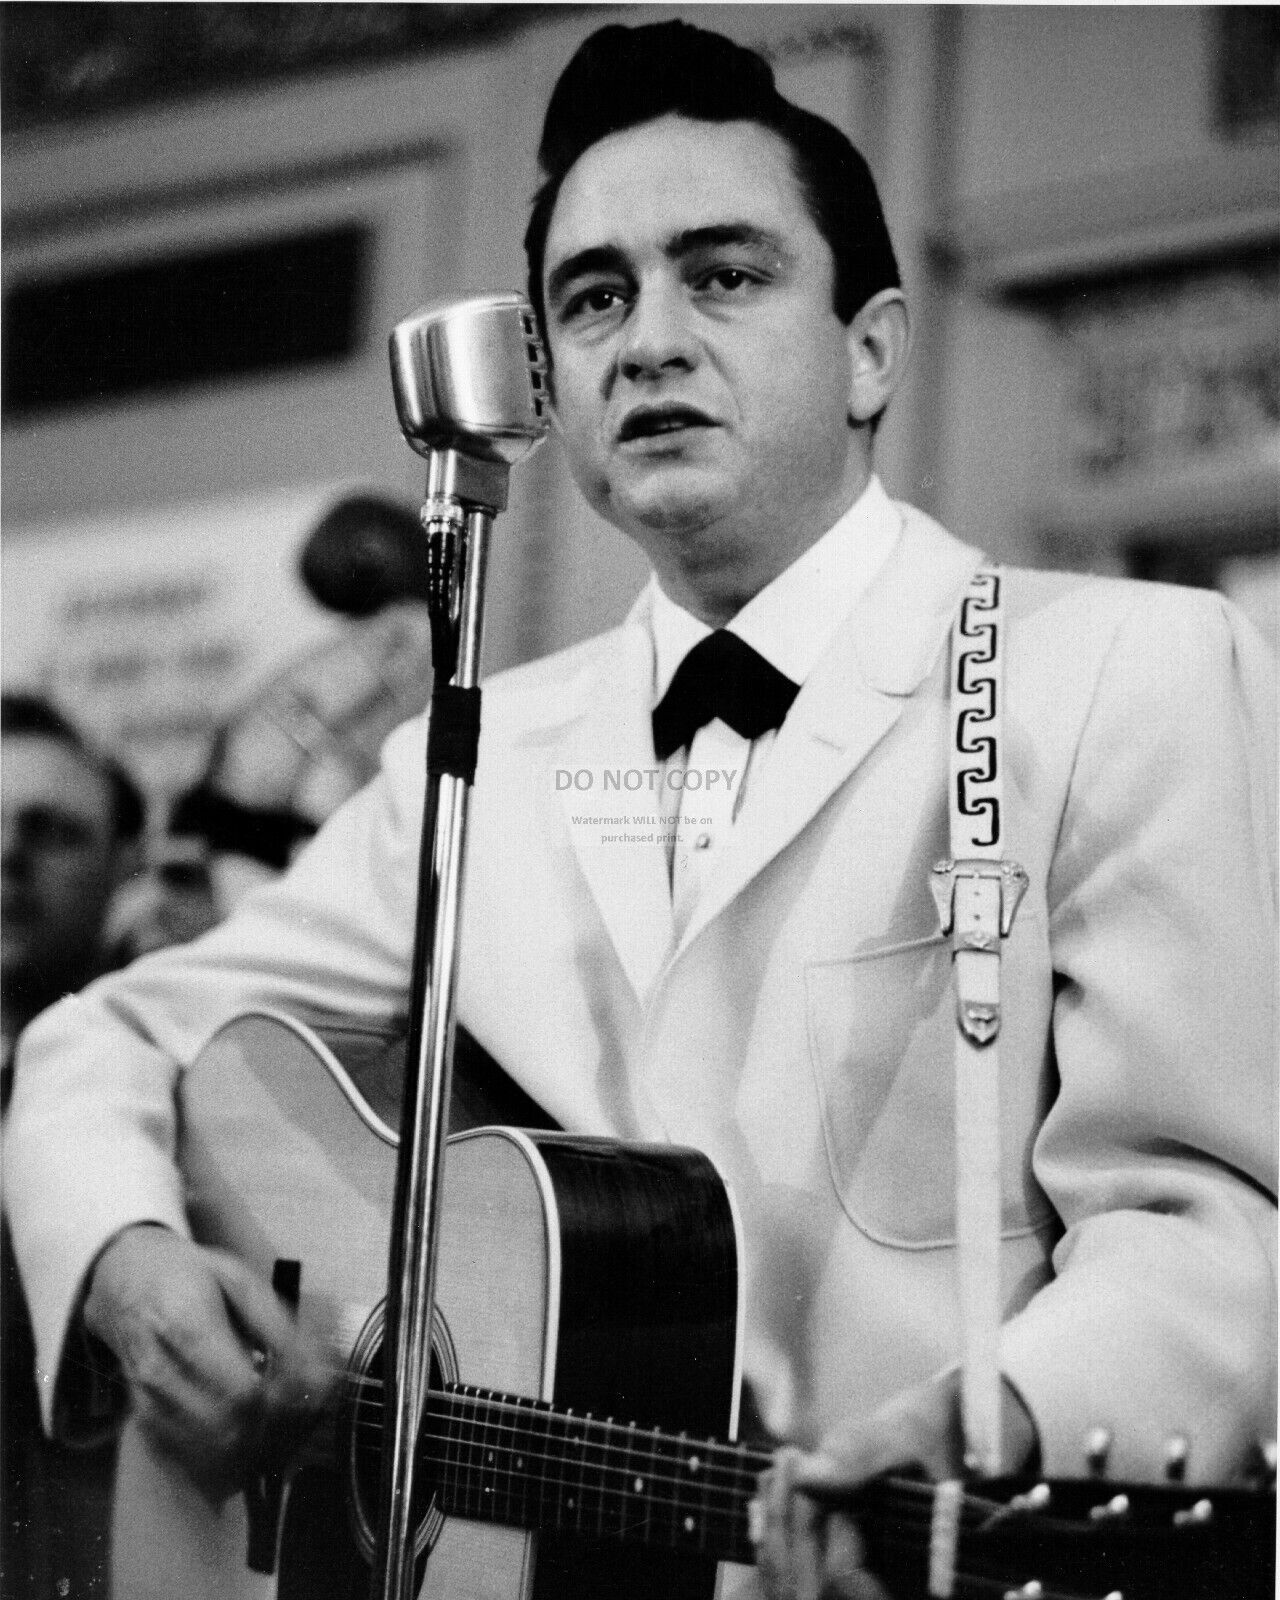 JOHNNY CASH ROCKABILLY SINGER ON STAGE IN 1958 - 8X10 PUBLICITY PHOTO (AA-615)